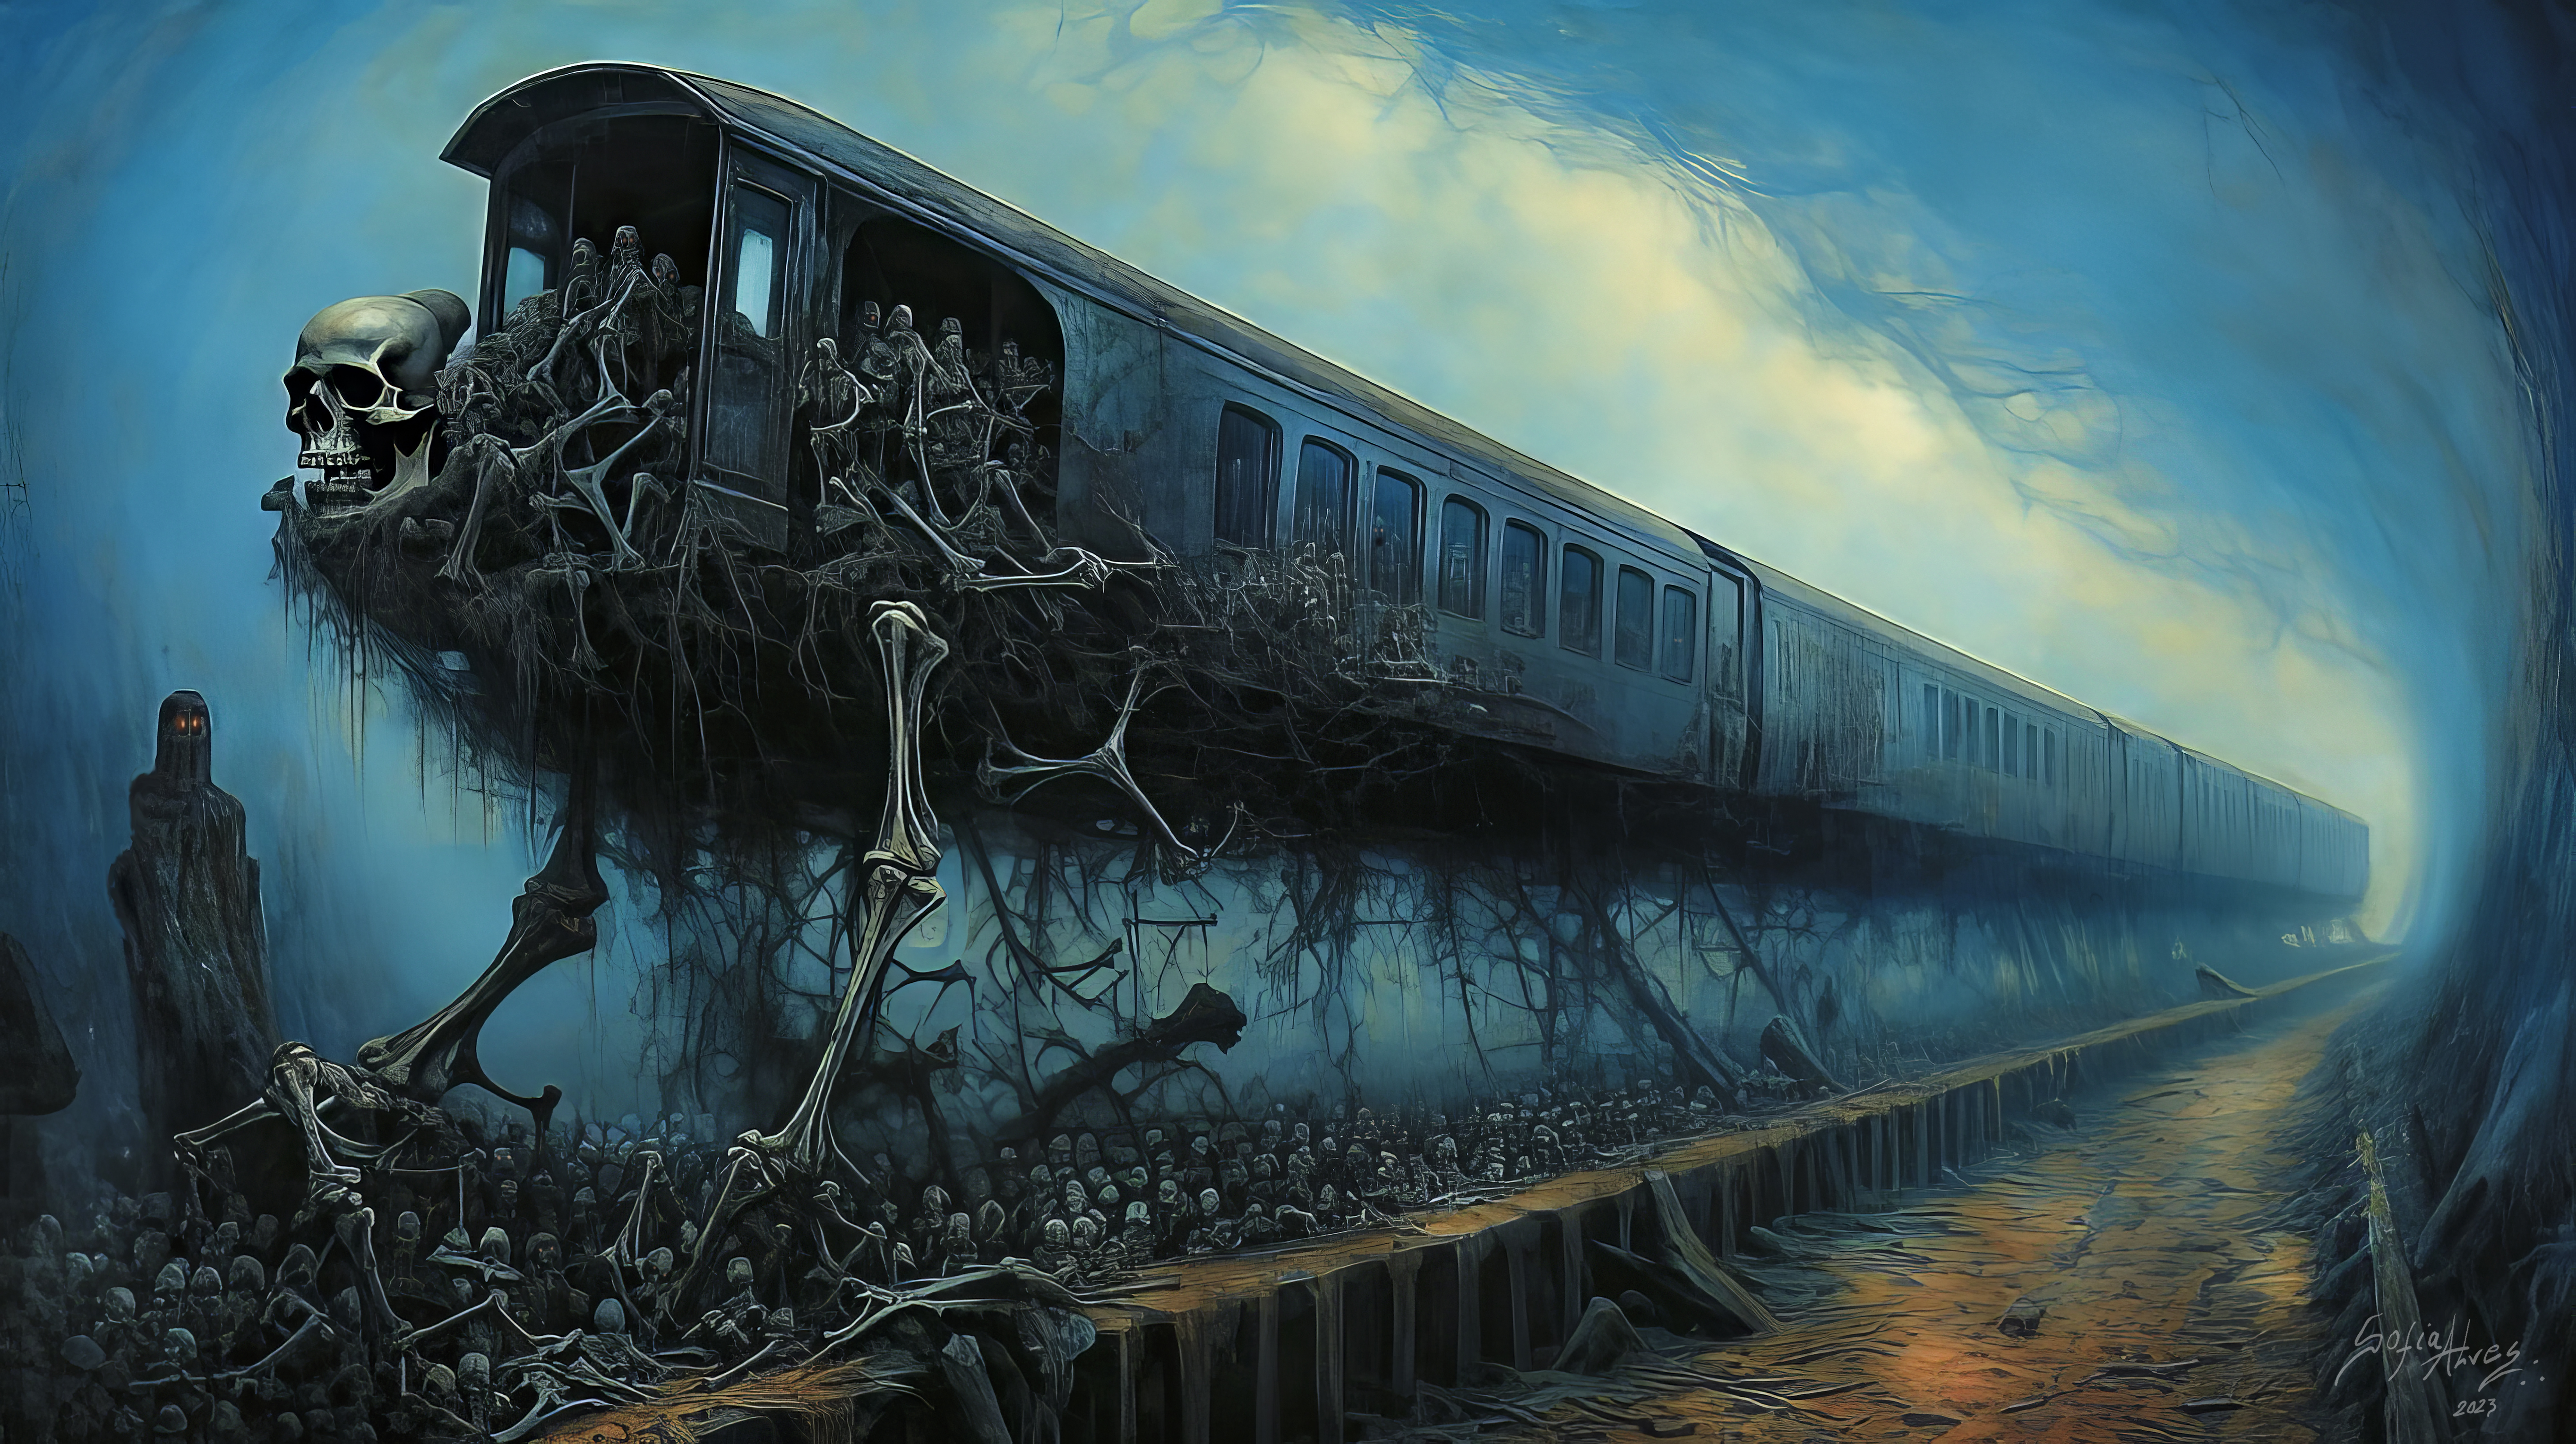 #3 The Spectral Train